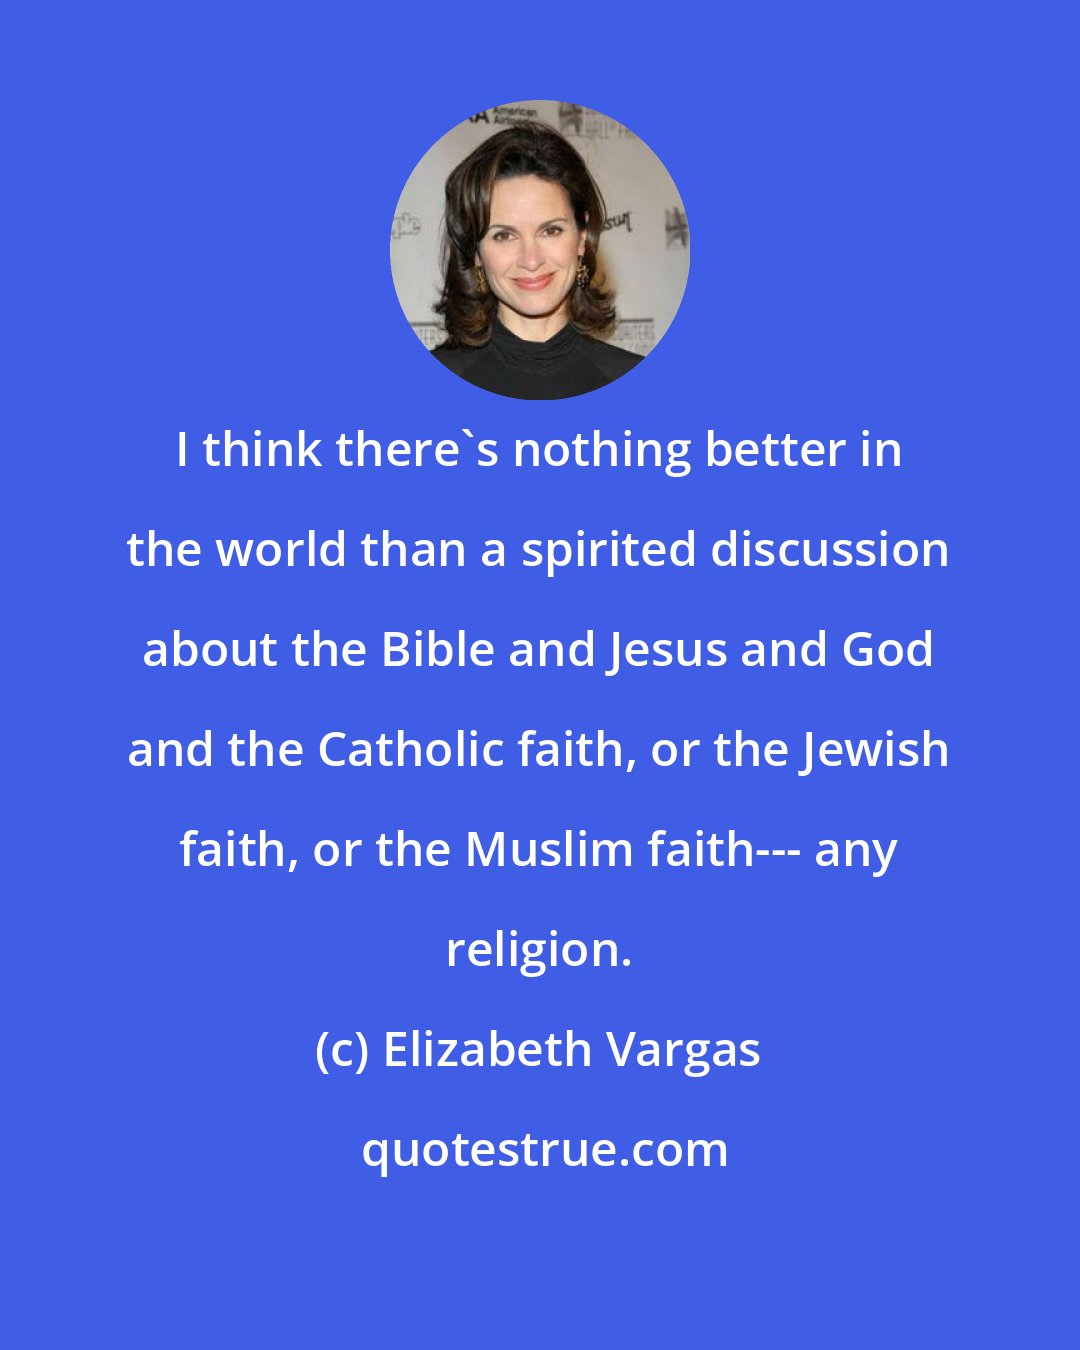 Elizabeth Vargas: I think there's nothing better in the world than a spirited discussion about the Bible and Jesus and God and the Catholic faith, or the Jewish faith, or the Muslim faith--- any religion.